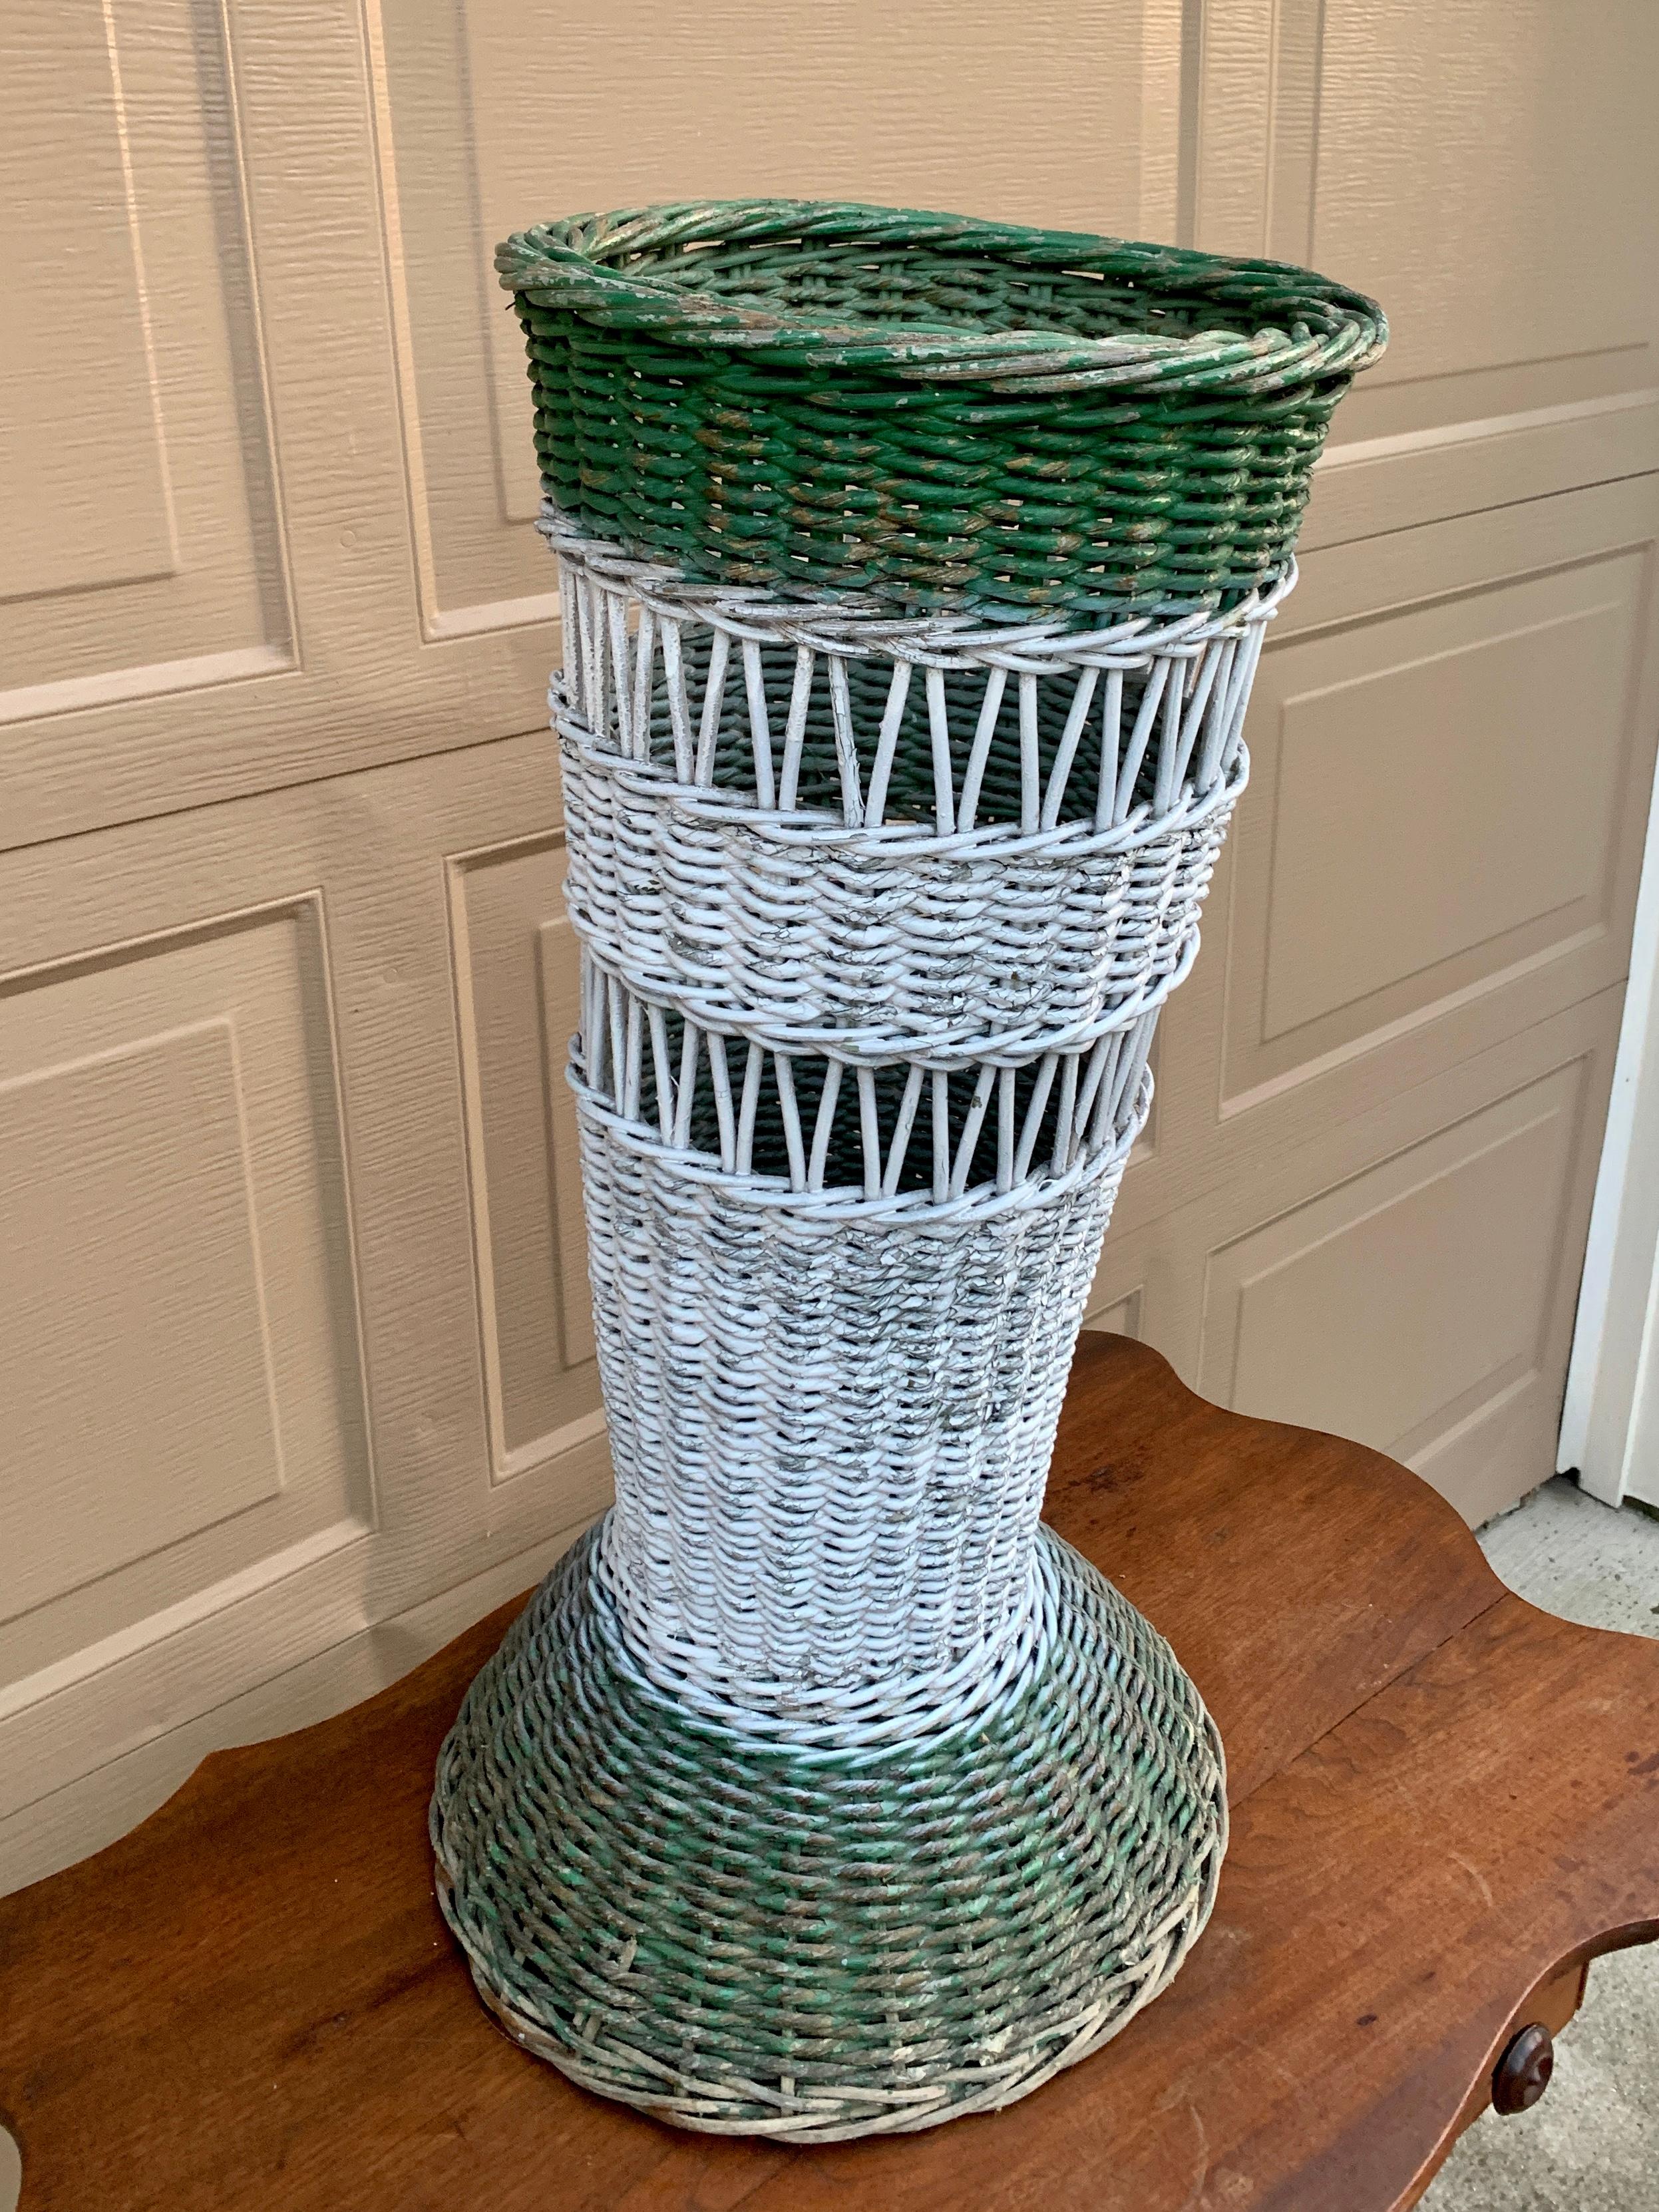 Antique Painted Woven Wicker Umbrella Basket, Late 19th Century In Good Condition For Sale In Elkhart, IN